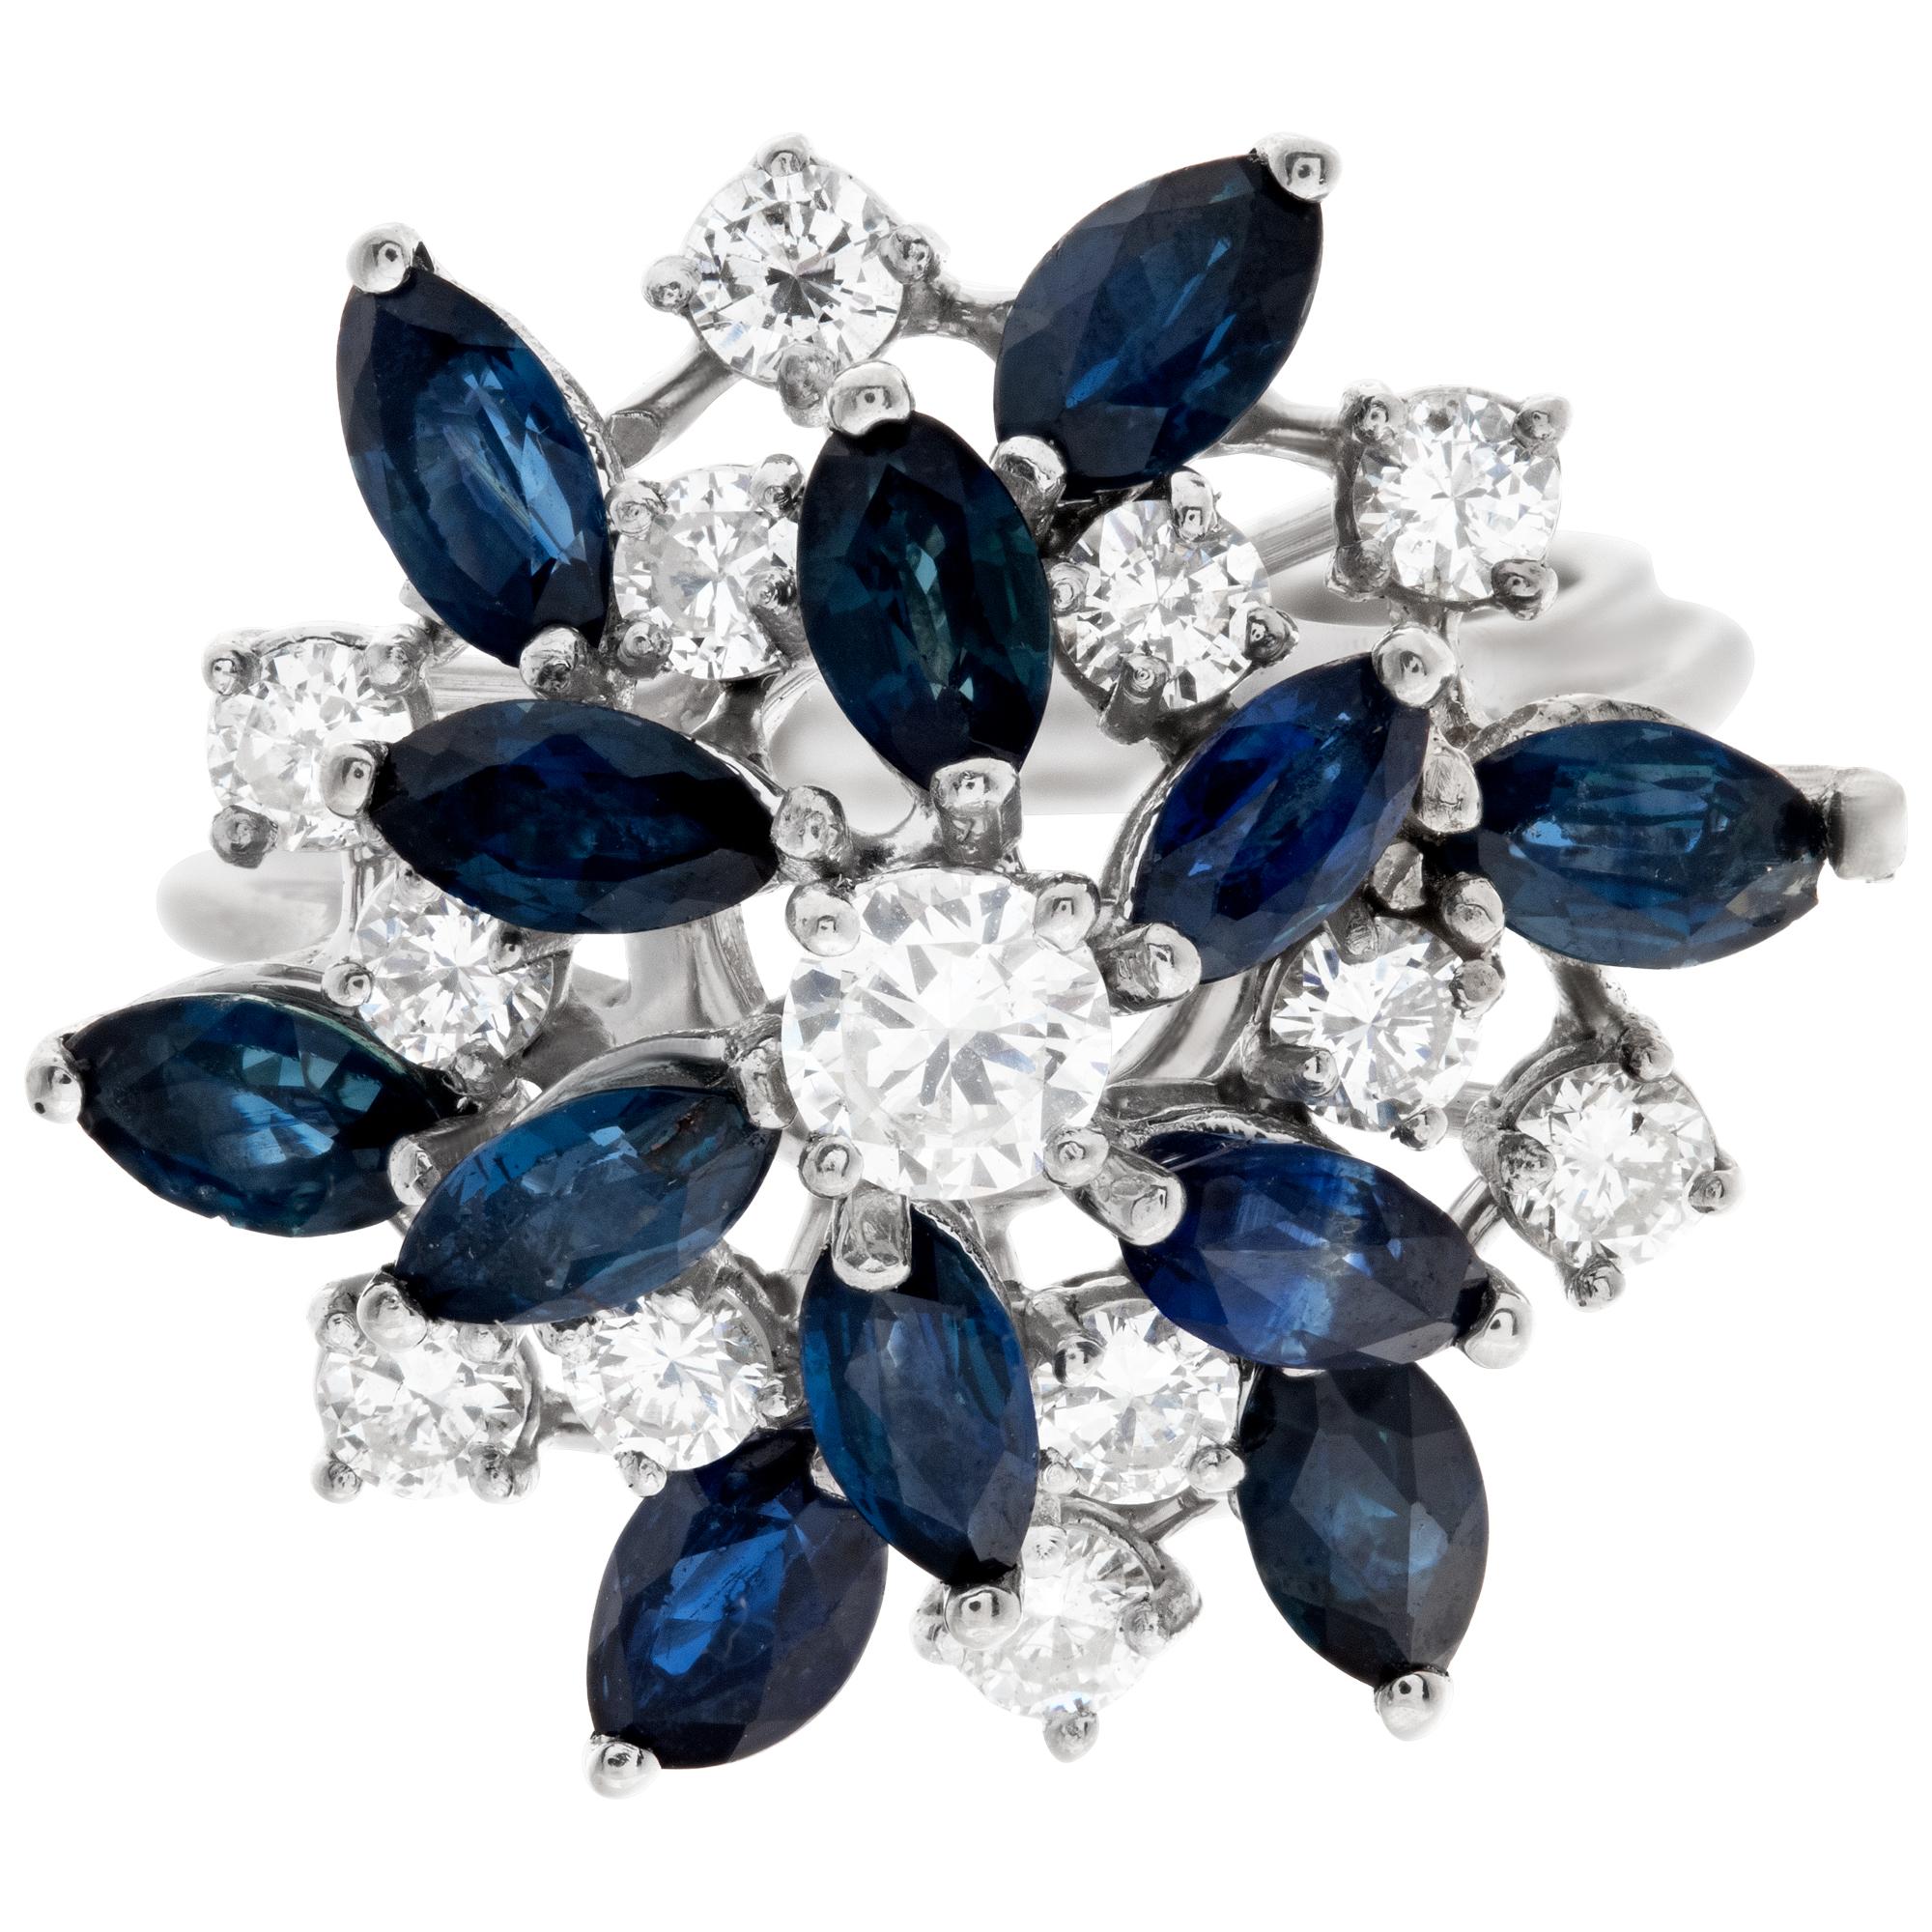 Flower style diamond and sapphire ring in 14k white gold, with approximately 1.50 carats in G-H color, VS-SI clarity diamonds and over 2 carats in blue sapphires. size 6

This Diamond/Sapphires ring is currently size 6 and some items can be sized up